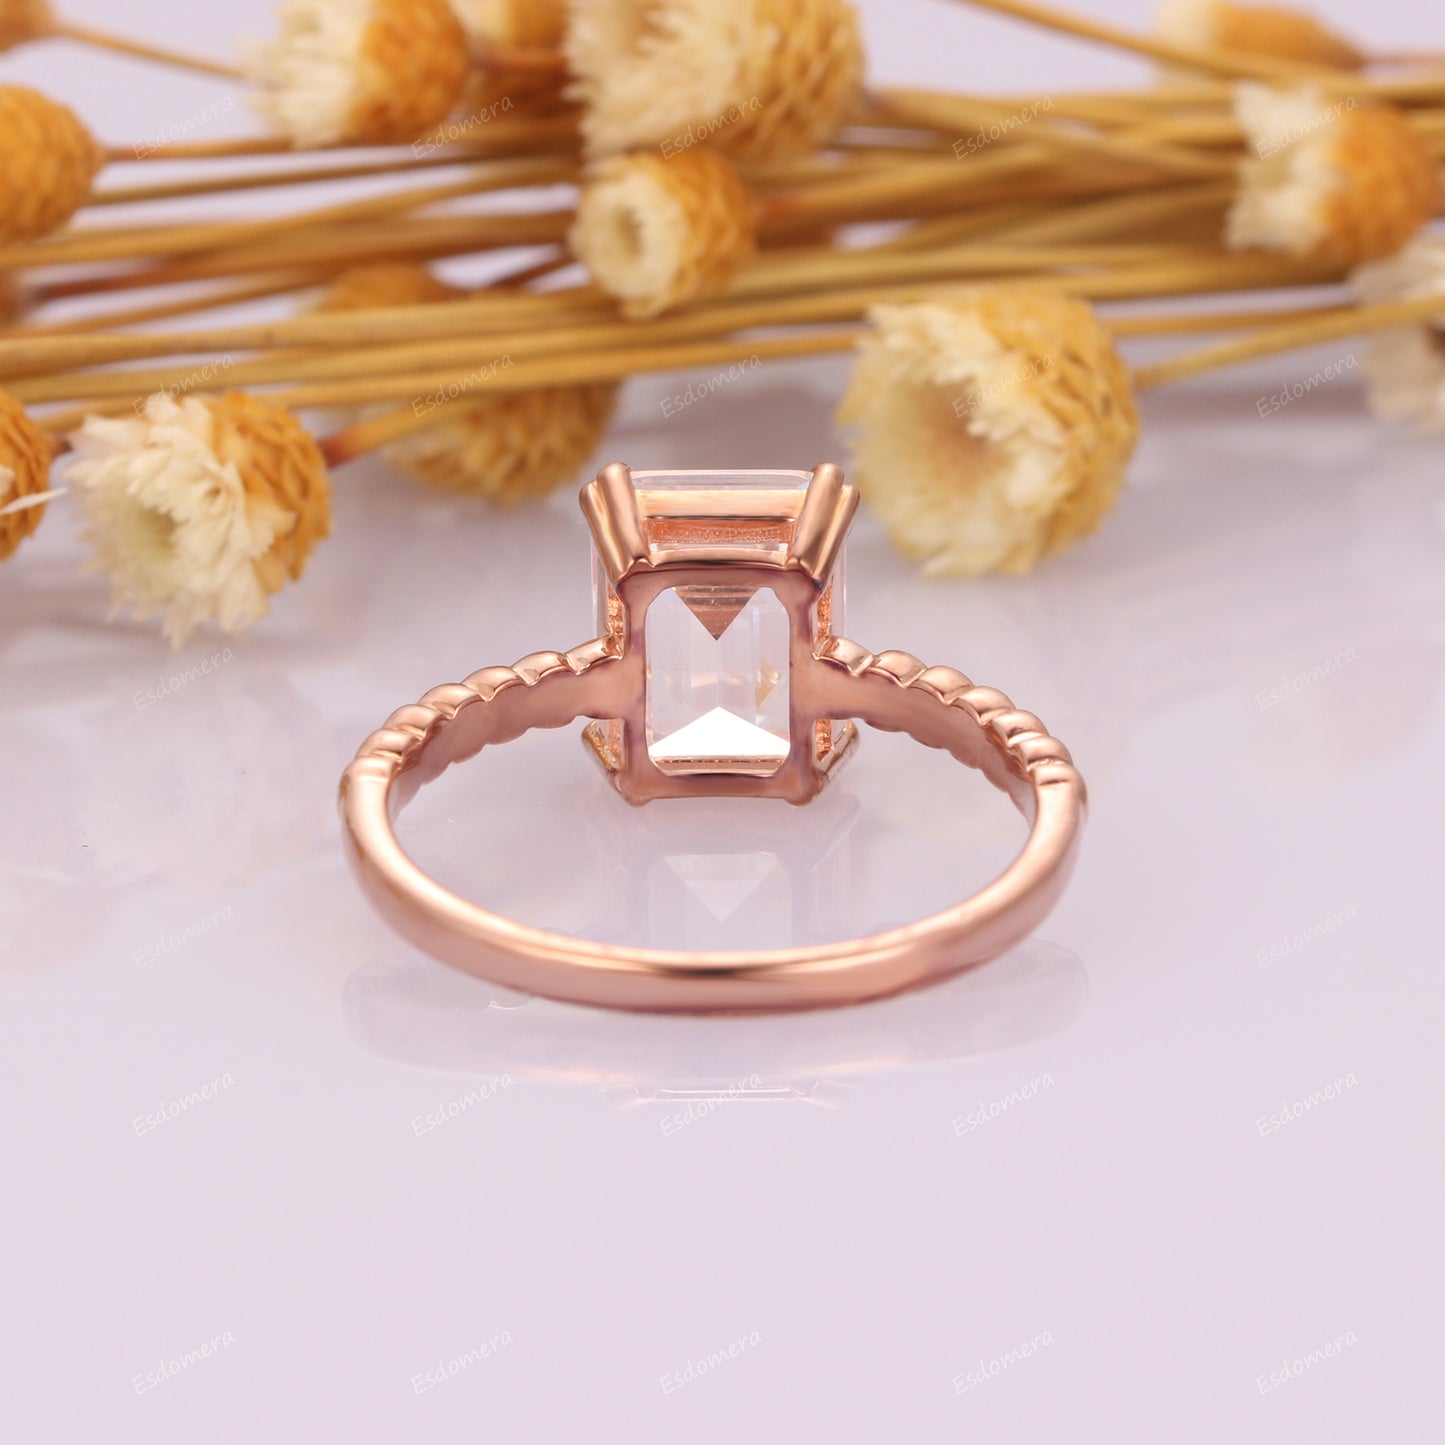 Prong Set 7x9mm Emerald Cut Moissanite Solitaire Promise Ring, 14k Rose Gold Engagement Ring For Her, Art Deco 3CT Moissanite Anniversary Ring